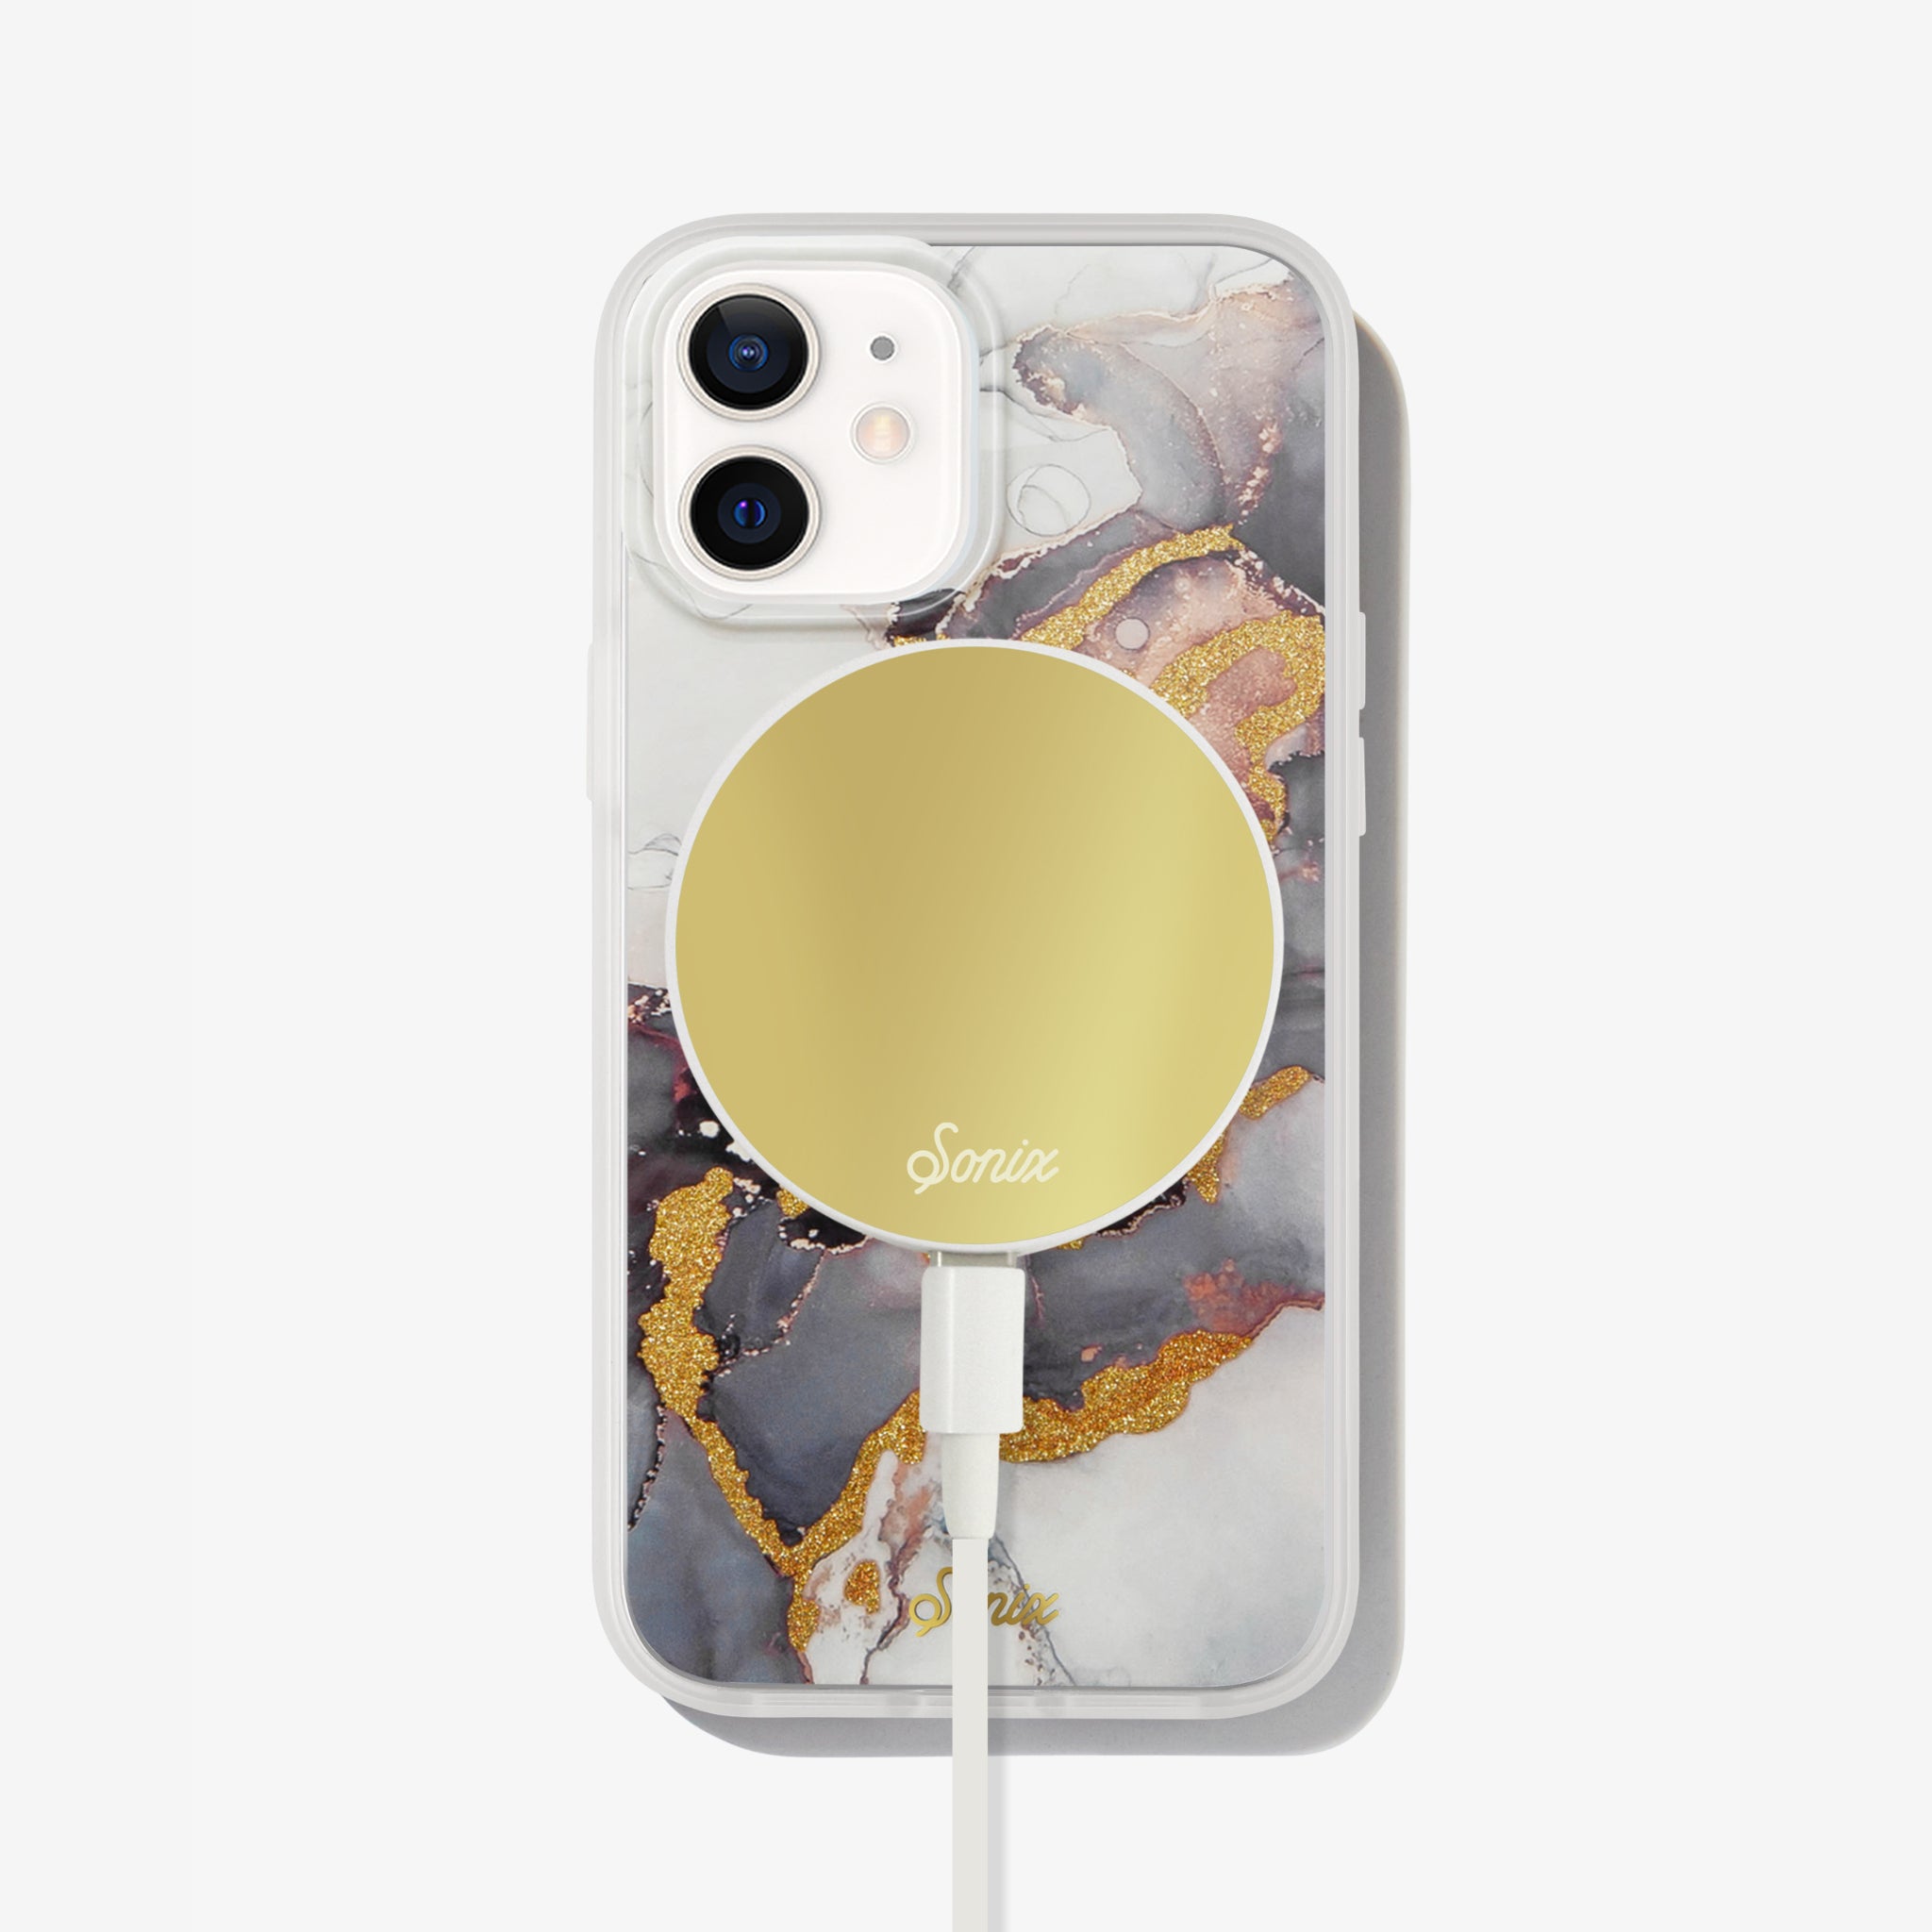 an intergalactic purple and dark colored design with gold glitter to bring out-of-this-world elements shown on an iphone 12  with a gold maglink charger on the back 